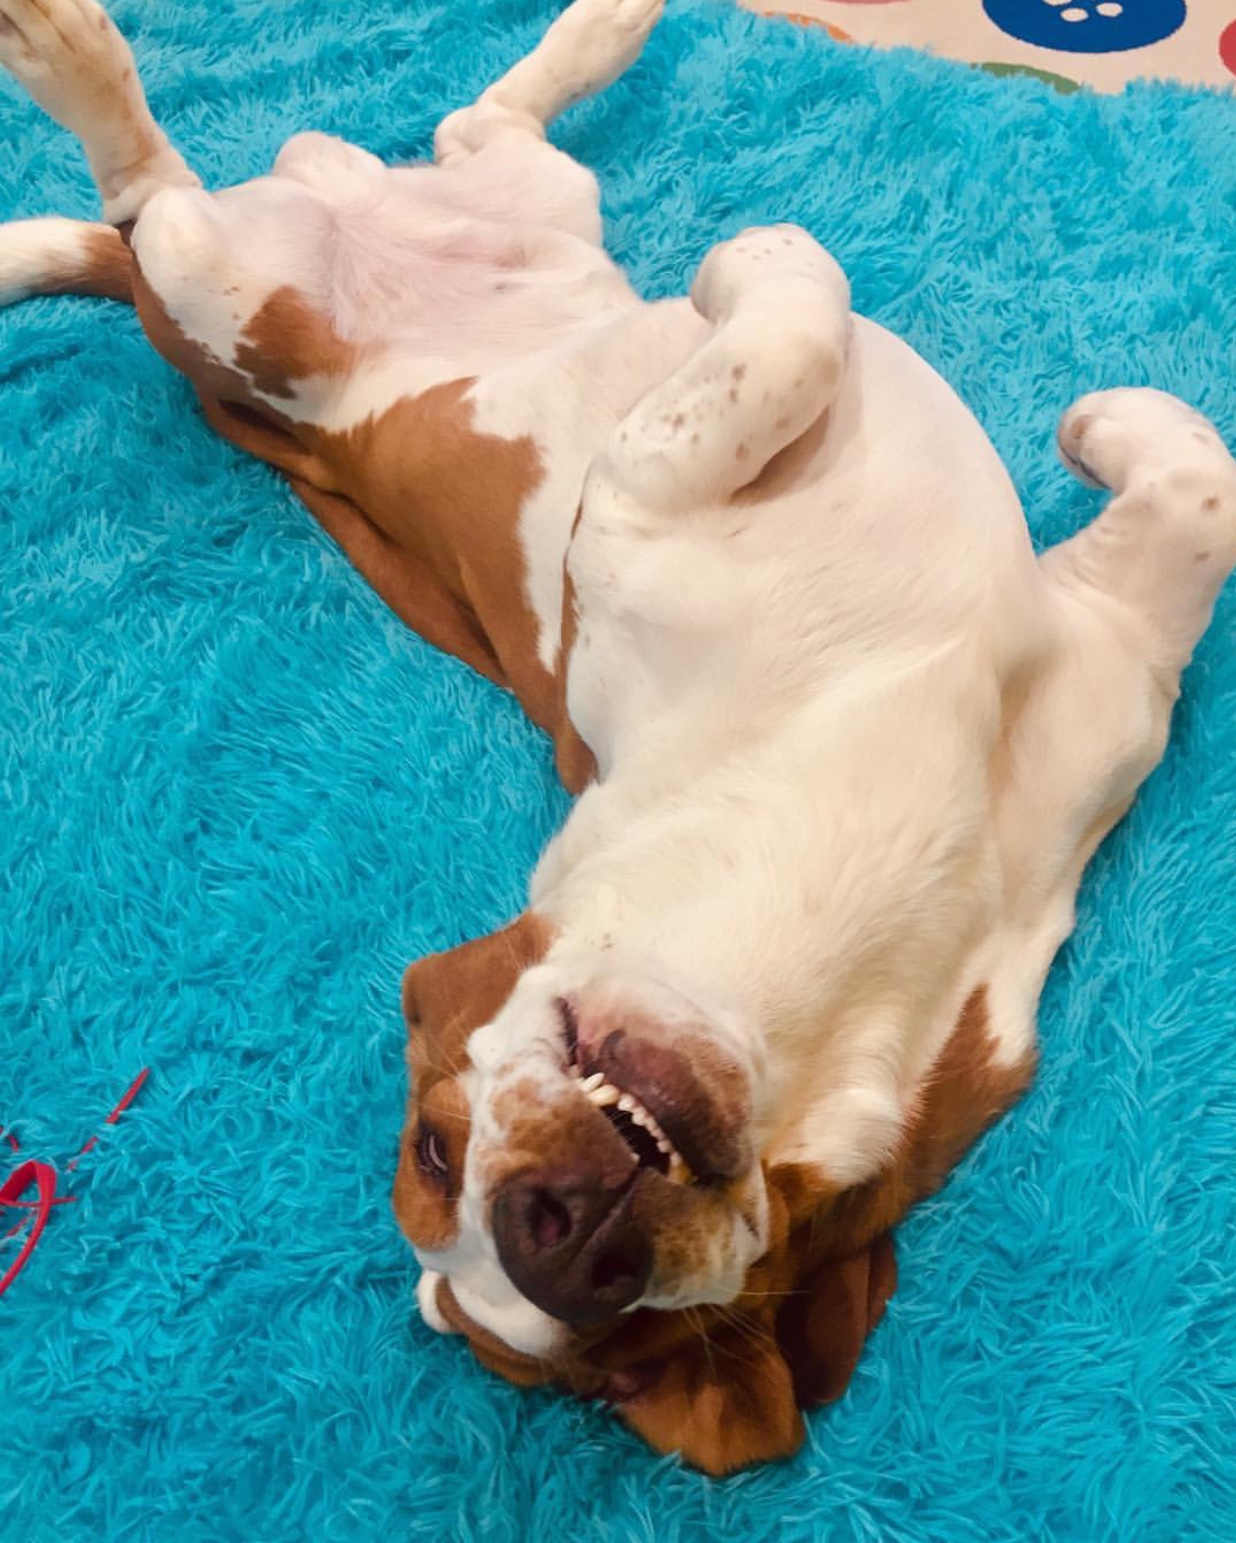 A Basset Hound lying on a blue blanket while smiling